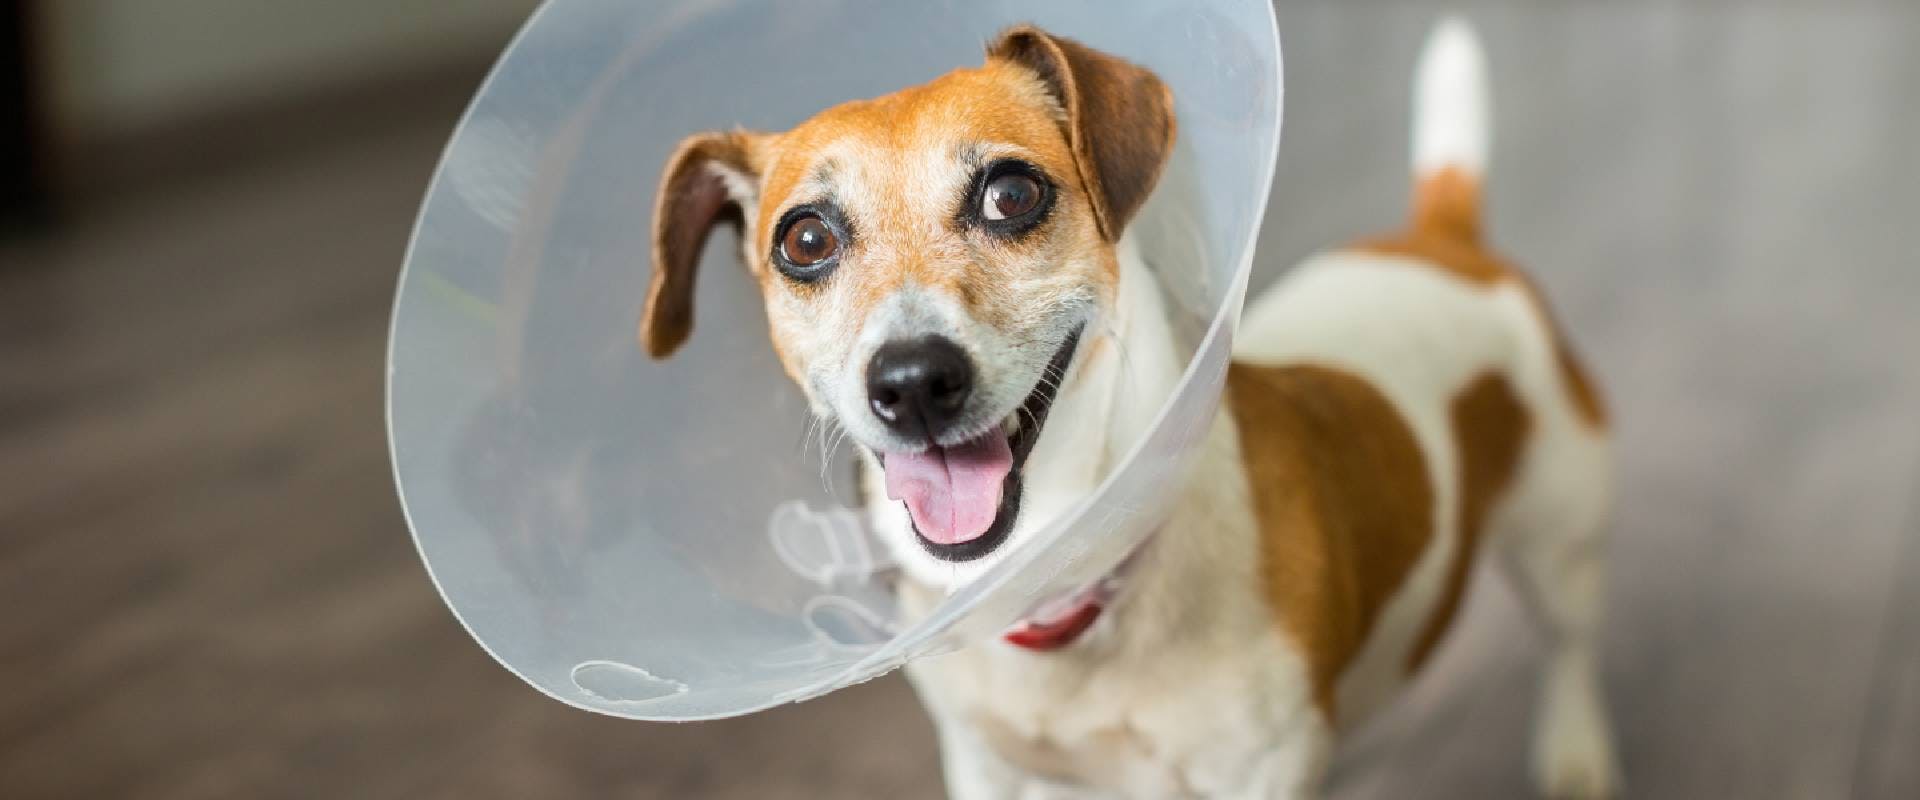 The top 5 cone of shame alternatives for dogs and cats